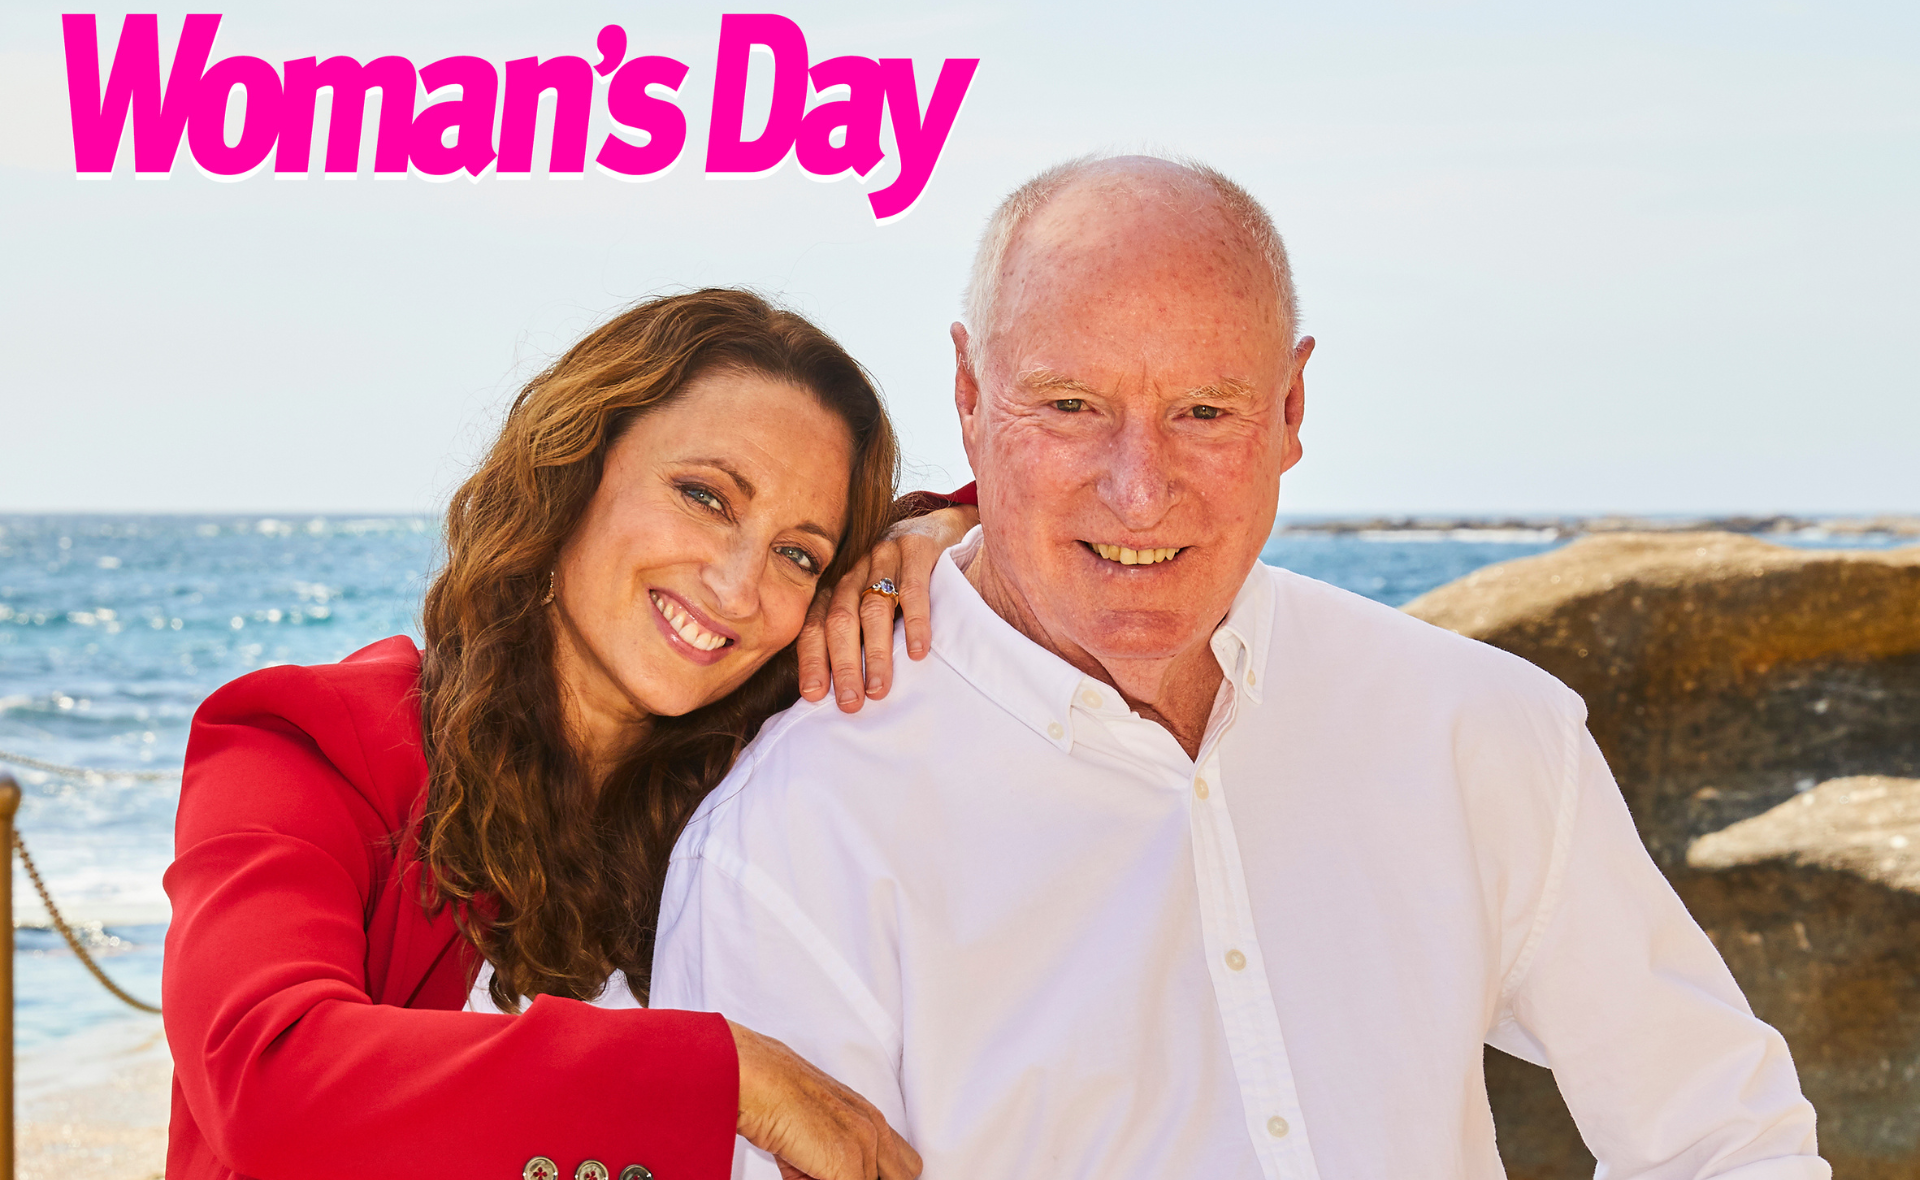 Home and Away’s Ray Meagher and Georgie Parker show what 13 years of friendship looks like